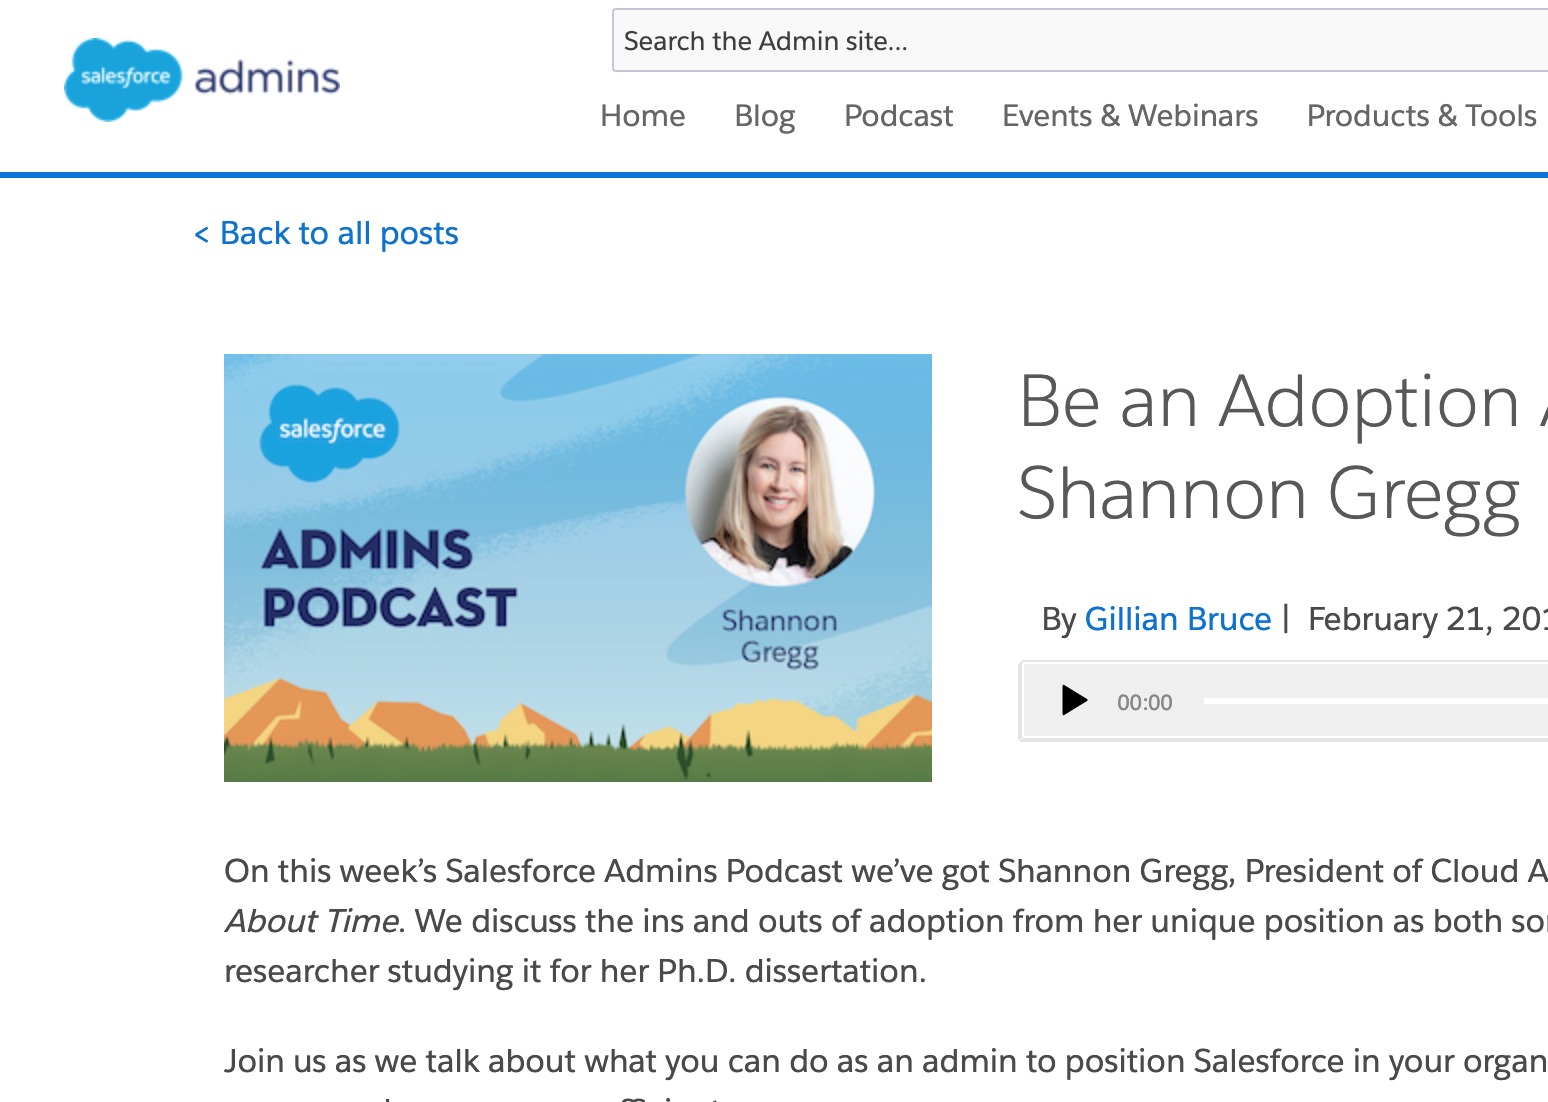 Recent Press:  Shannon J. Gregg featured on Salesforce Podcast